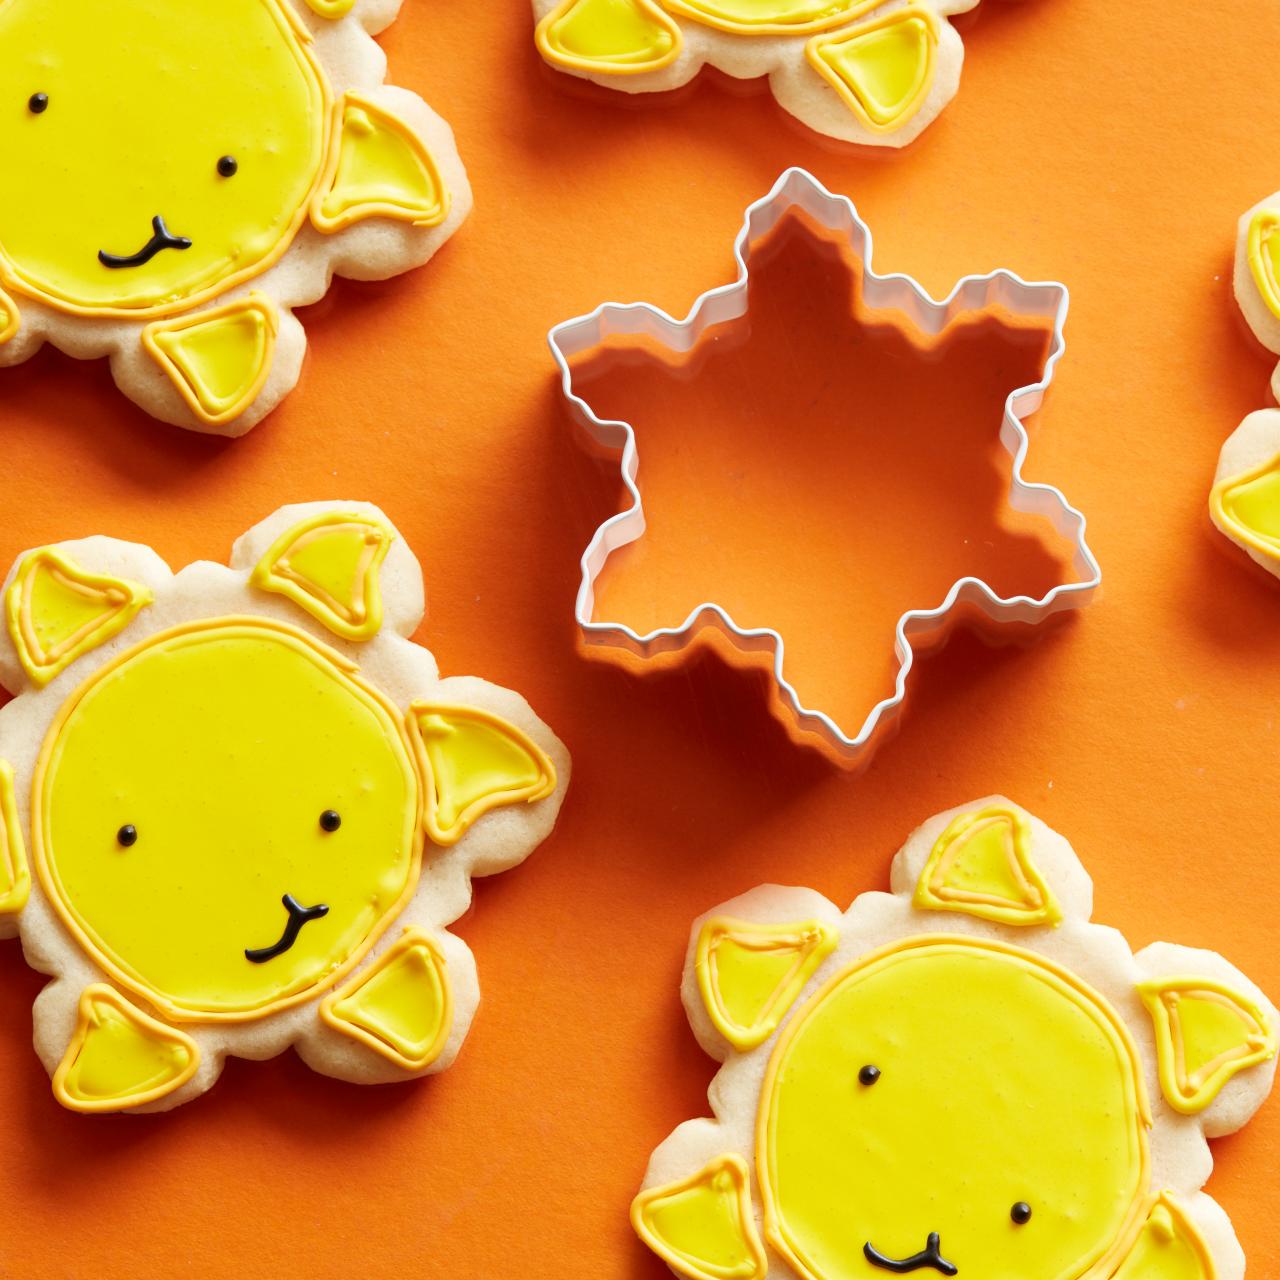 8 Surprising Uses for Cookie Cutters 